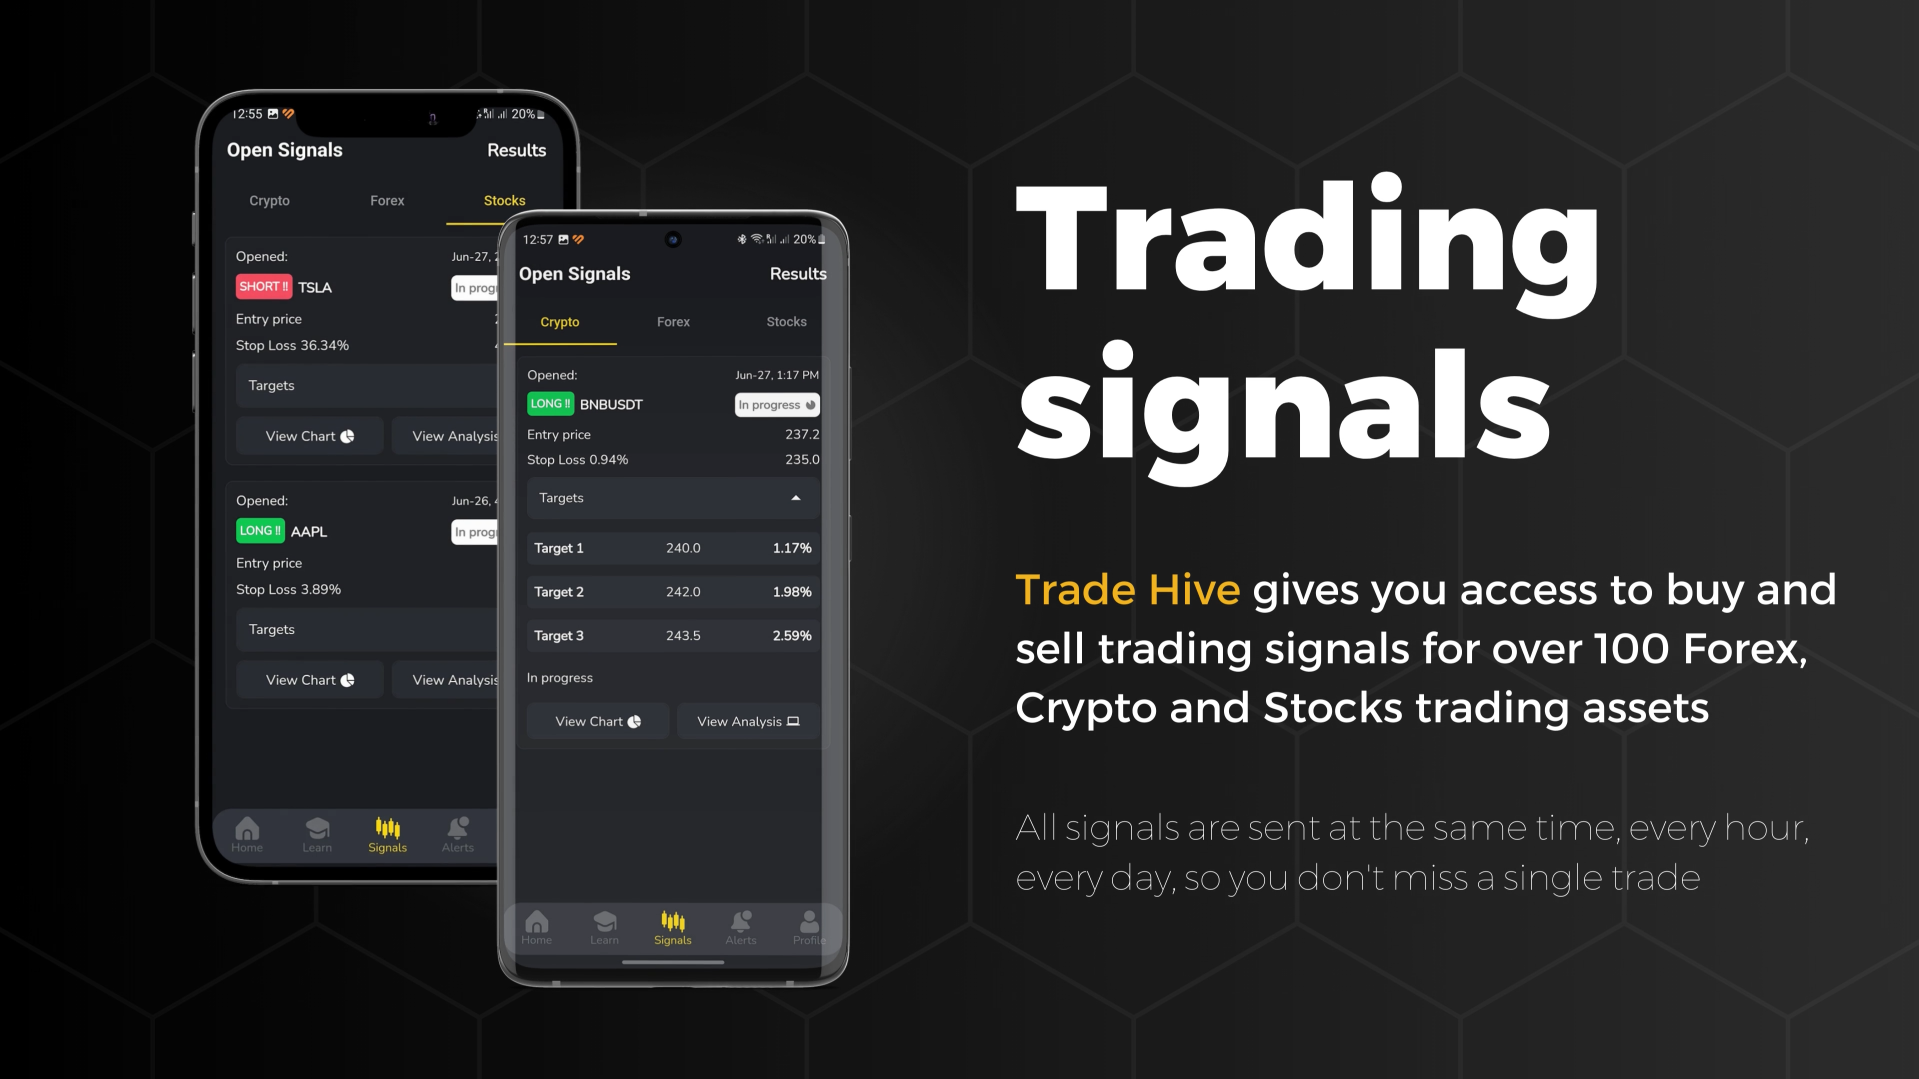 The TradeHive mobile app will help you with everything you have been looking for. This application will replace all Telegram Channels for Forex and Cryptocurrency Signals.

👉You can find this and other Take Profits in our Trade Hive mobile app. Available on android: Click
https://play.google.com/store/apps/details?id=com.tradehive.signals 

👉You can find this and other Take Profits in our Trade Hive mobile app. Available on iOS: Click
https://apps.apple.com/us/app/trade-hive-signals/id6450733317 


This free app gives you access to buy and sell trading signals for over 100 Forex, Crypto and Stocks trading assets.

Each signal is generated and analyzed by professional traders in real time for both major and minor trading instruments.

Become a successful profitable Forex trader with our TradeHive app and earn every day trading. Learn to trade on the market for free among professional successful traders from all over the world.

All trading signals include:
cryptosignals
stock signals
currency signals
Trading alerts coming soon
market analysis
fundamental analysis
technical analysis


Free training for beginners, as well as technical tutorials on Forex trading, such as how to trade profitably using fundamental and technical analysis, or use trading strategies, which you can also find in this application.

Educational materials
Applying knowledge gained from medical research and research, in addition to years of experience in trading various assets in the financial markets, TradeHive provides free educational and training materials in various categories.

Technical analysis and trading signals
Financial, technical and R&D teams collaborate to develop the most effective and predictive trading signals and technical analysis that use a variety of strategies with high success rates.

Track your portfolio in real time.

- Quotes and charts of global stocks, funds, currencies and markets.
- Alerts when holding an action to pronounce words.
- News
- Detailed information: opening, volume, average volume..
- Graphs with zoom and scroll
- Technical analysis
- Portfolio with profit/loss and charts